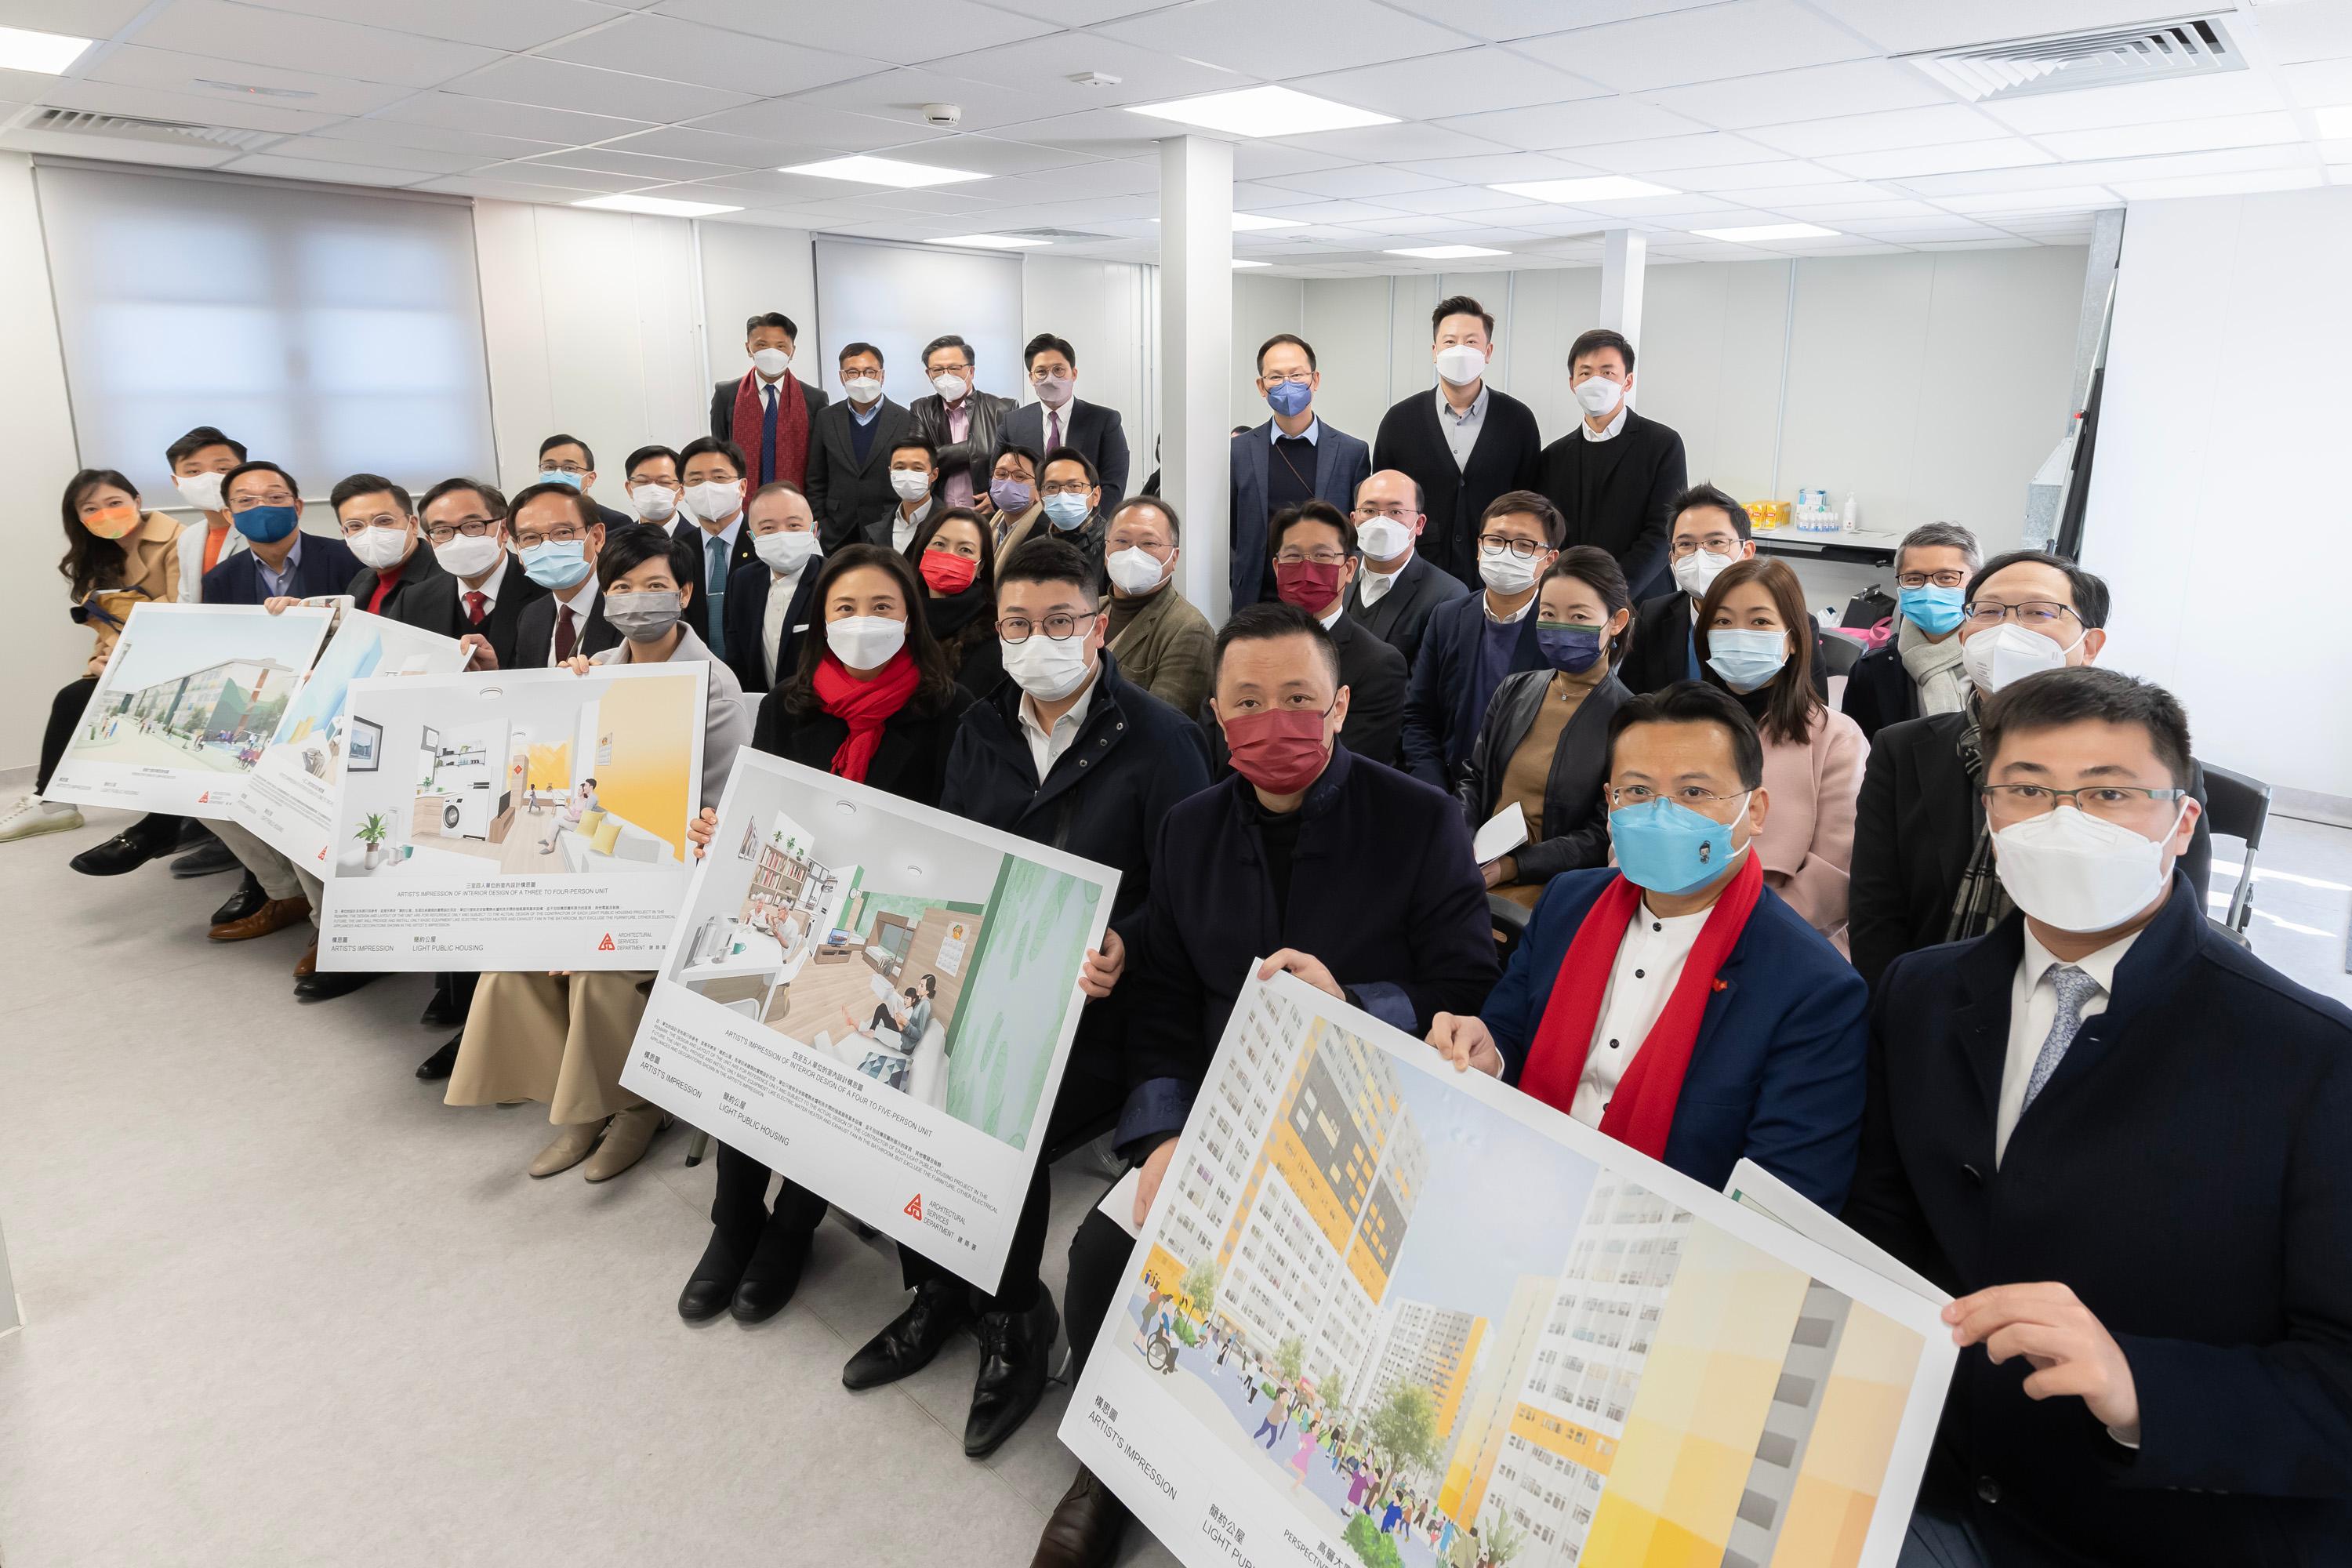 The Legislative Council (LegCo) Public Works Subcommittee visited a Light Public Housing (LPH) mock-up unit today (January 30). Photo shows LegCo Members, the Secretary for Housing, Ms Winnie Ho (front row, sixth right), and representatives of the Housing Bureau in a group photo.